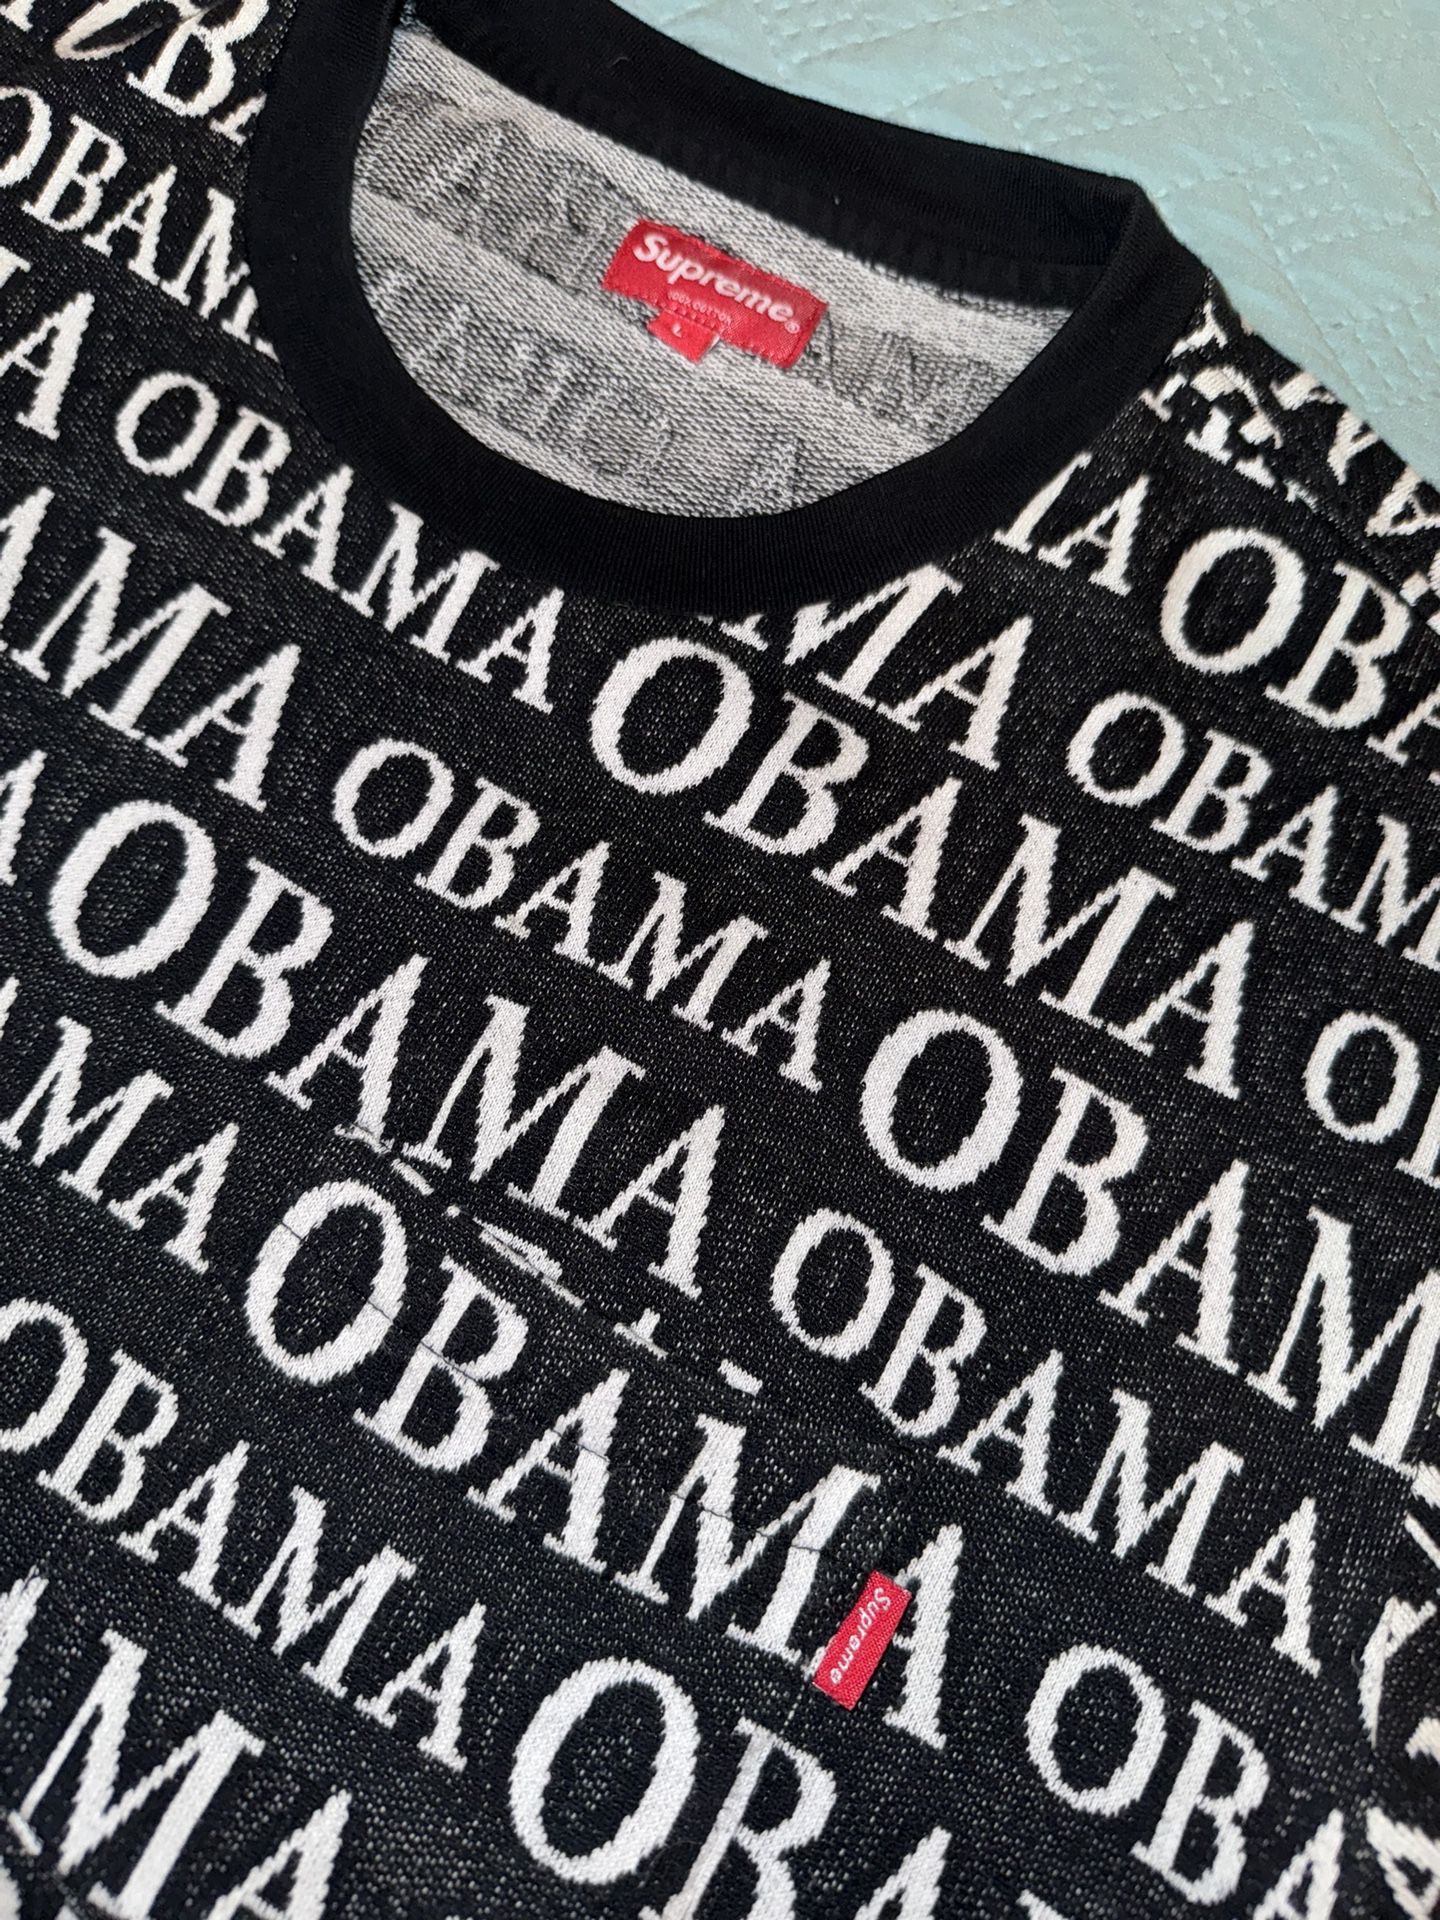 Supreme Obama Size Large Top - Great Preowned Condition And 100% AUTHENTIC 